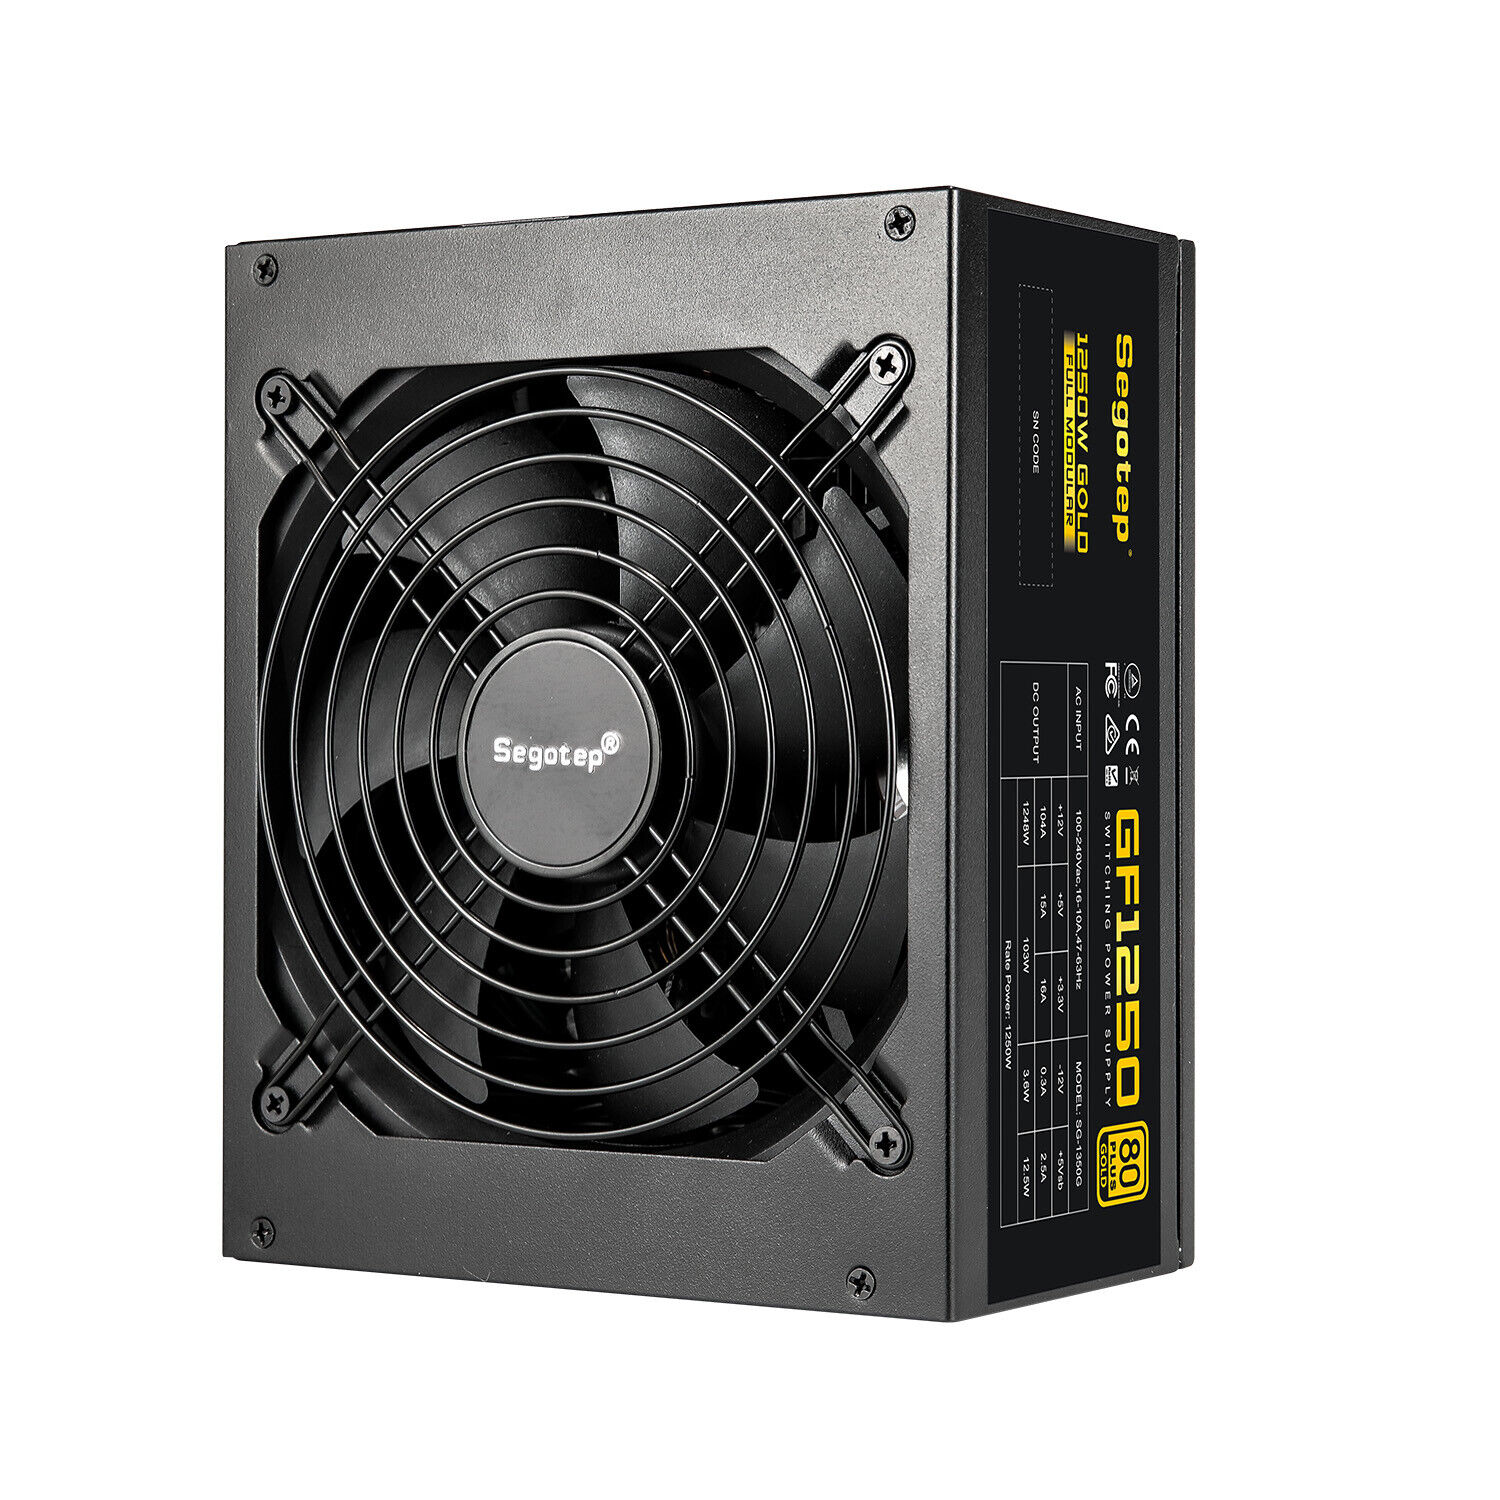 Segotep 1250W Gaming Power Supply 80 Plus Gold Certified ATX PSU with 140mm Fan